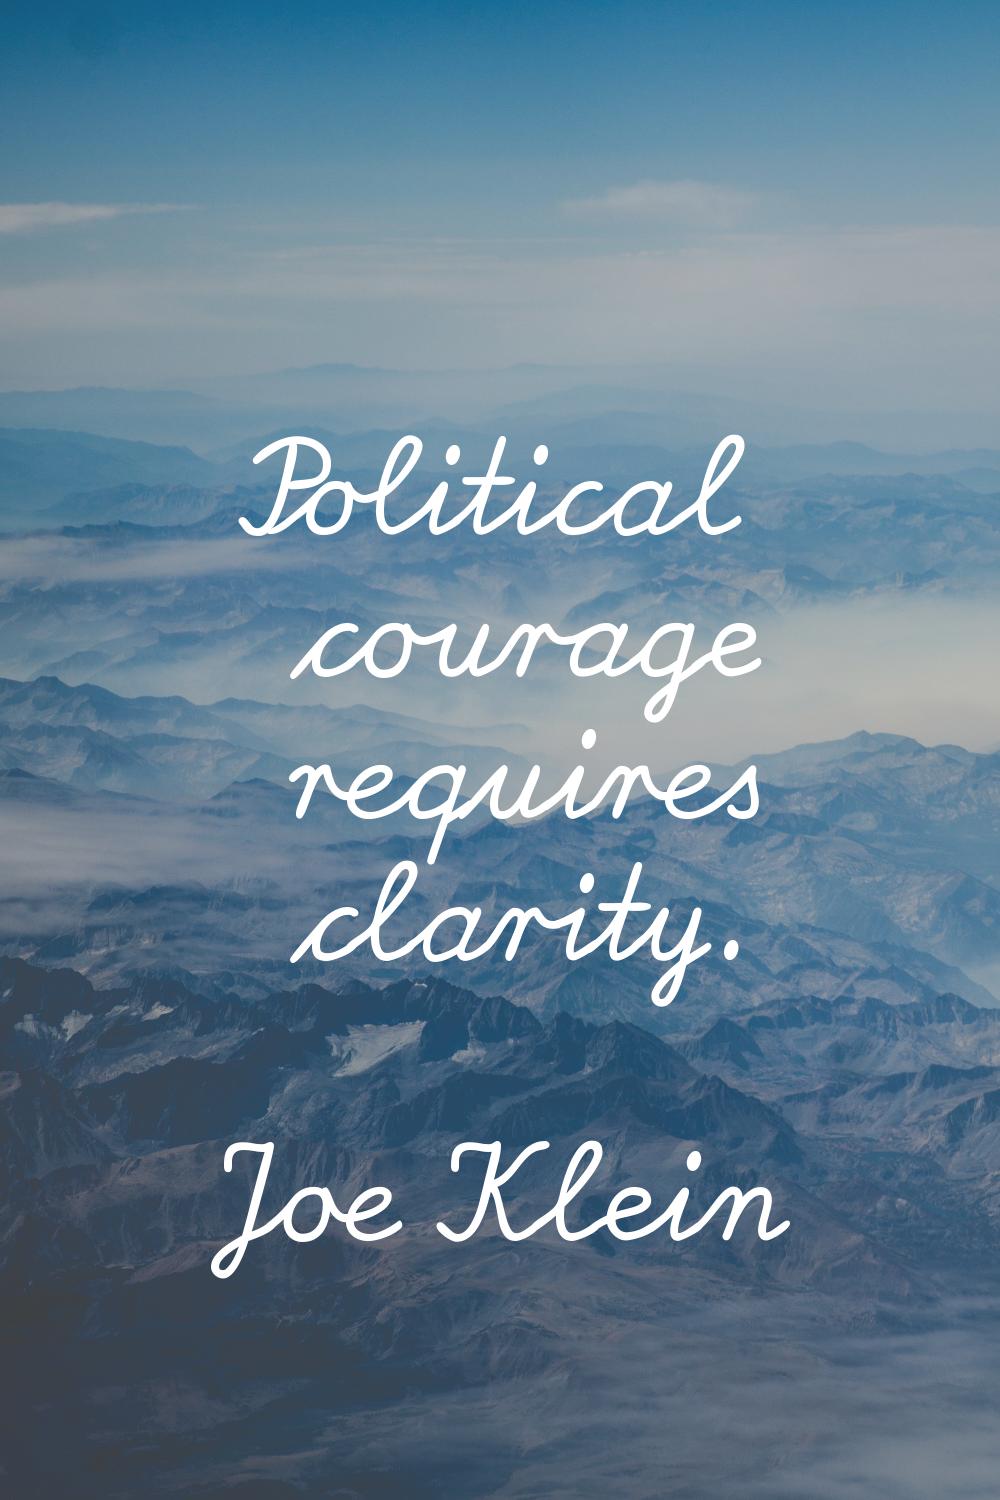 Political courage requires clarity.